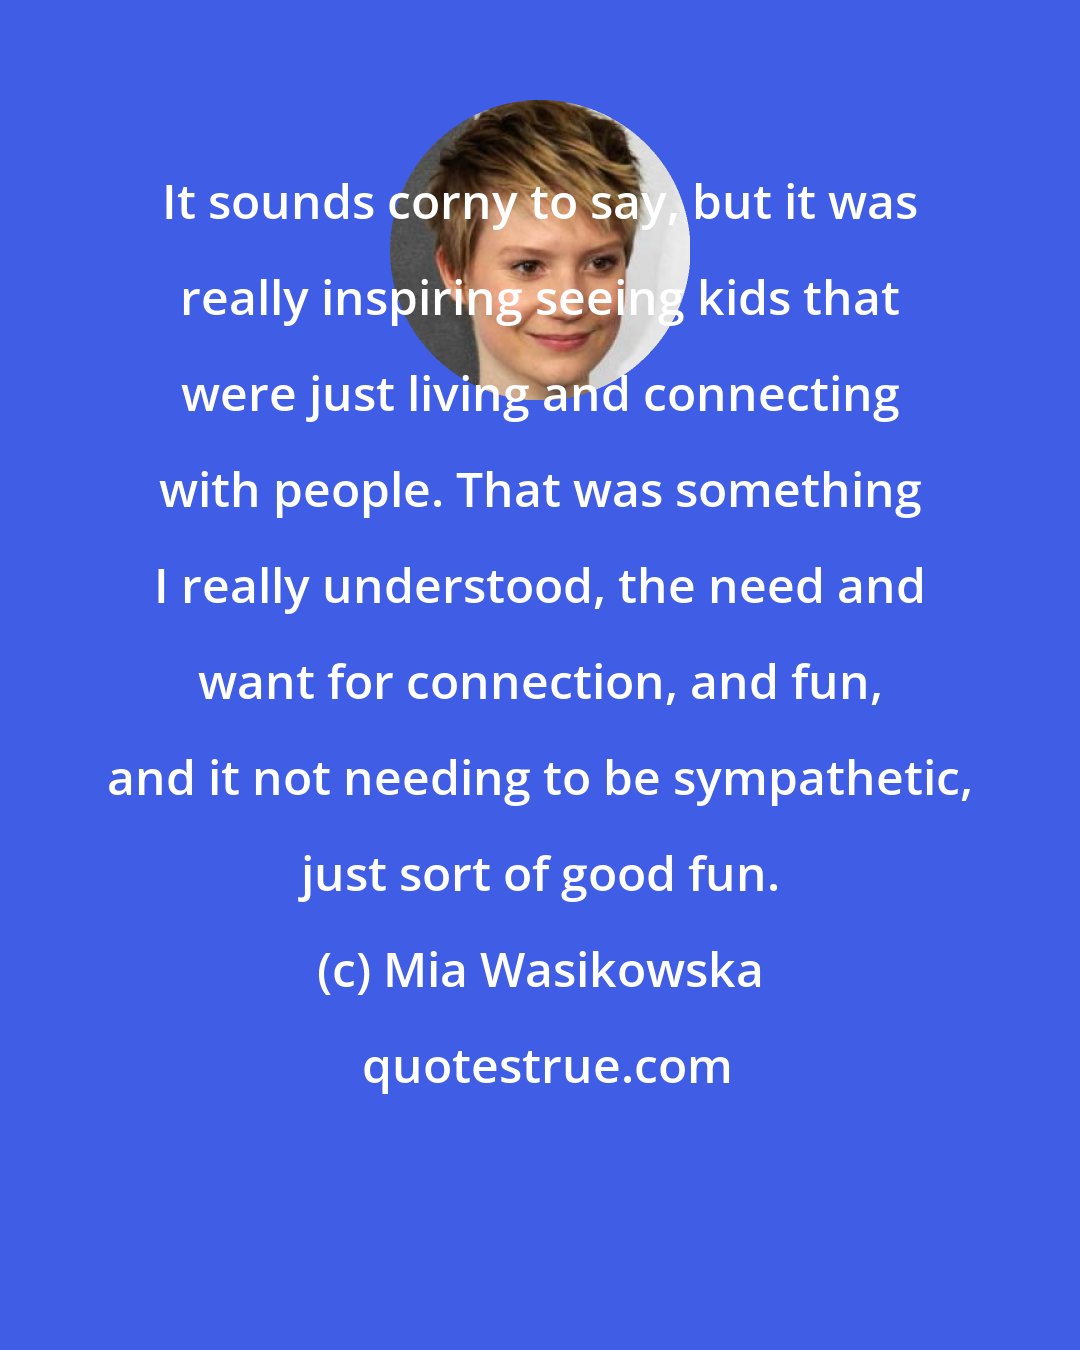 Mia Wasikowska: It sounds corny to say, but it was really inspiring seeing kids that were just living and connecting with people. That was something I really understood, the need and want for connection, and fun, and it not needing to be sympathetic, just sort of good fun.